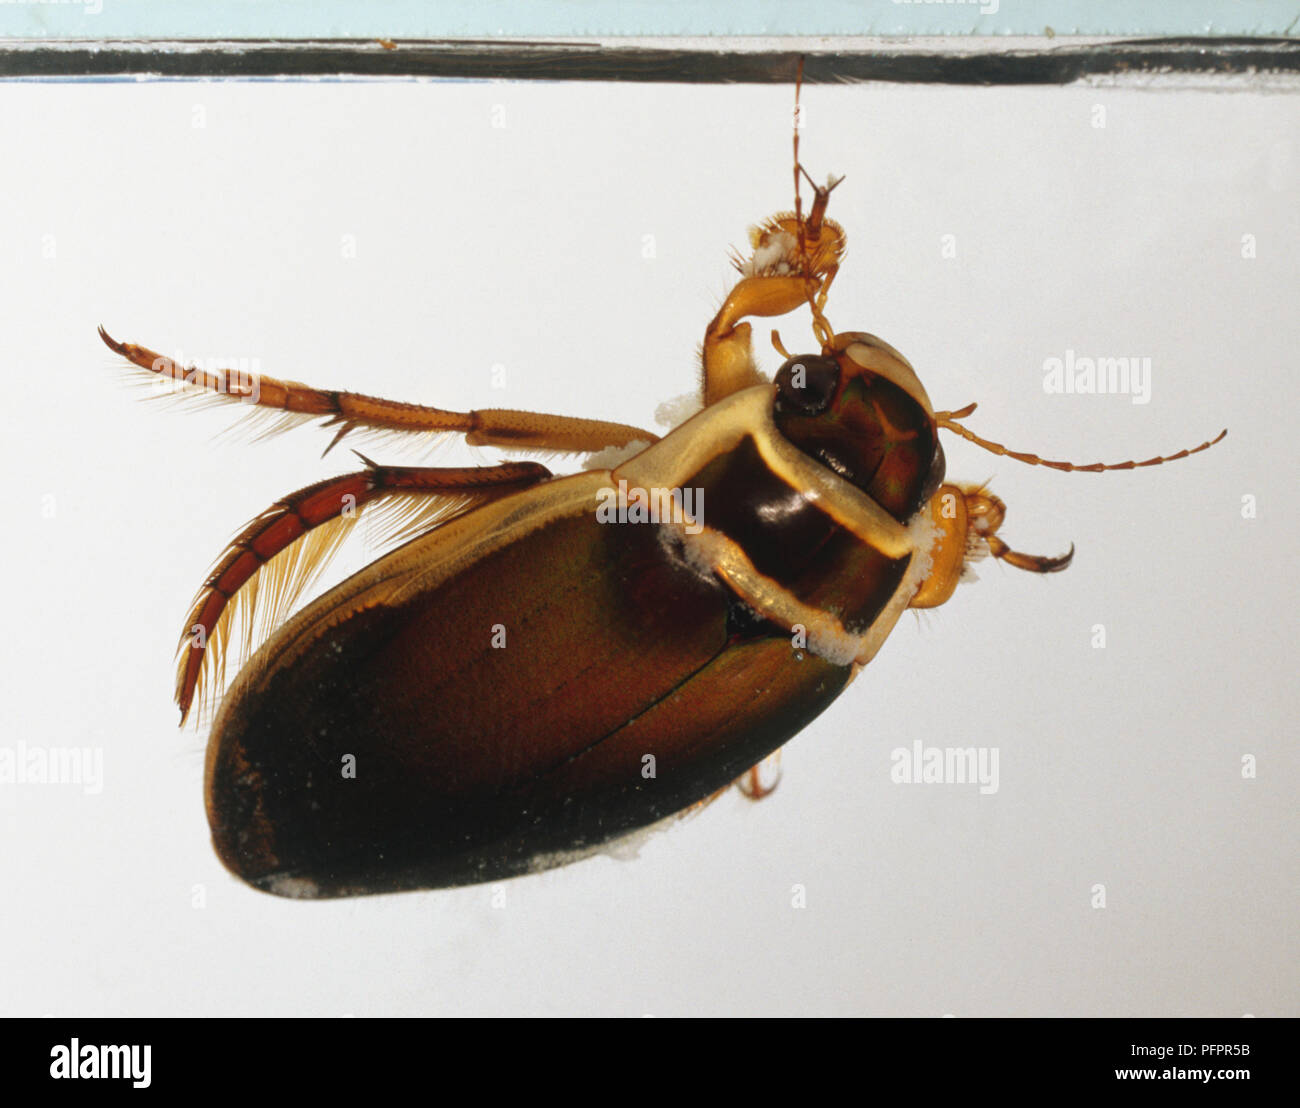 A brown Great Diving Beetle with fringes on its legs for propulsion through the water. Stock Photo